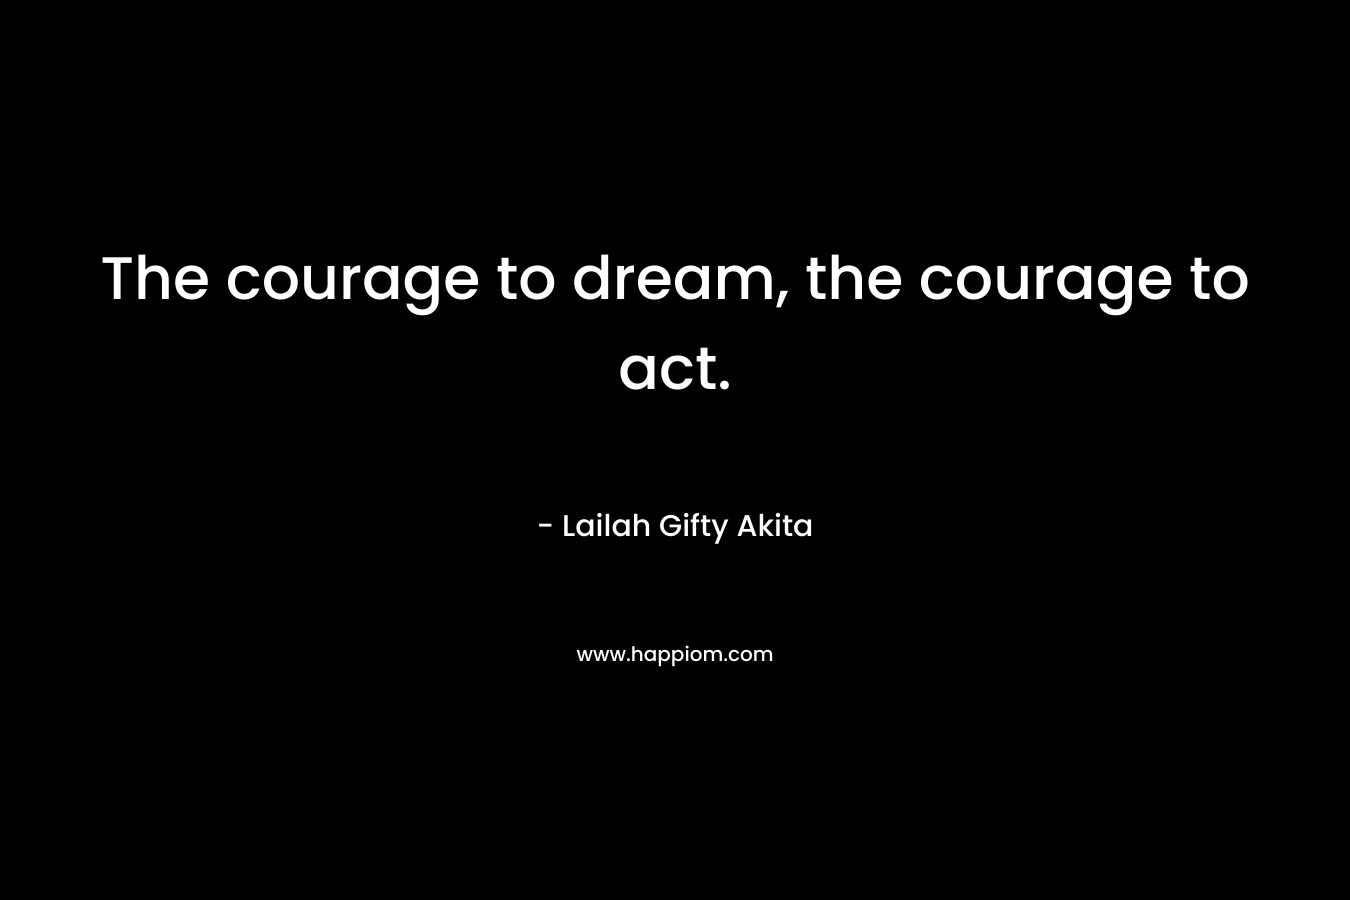 The courage to dream, the courage to act.